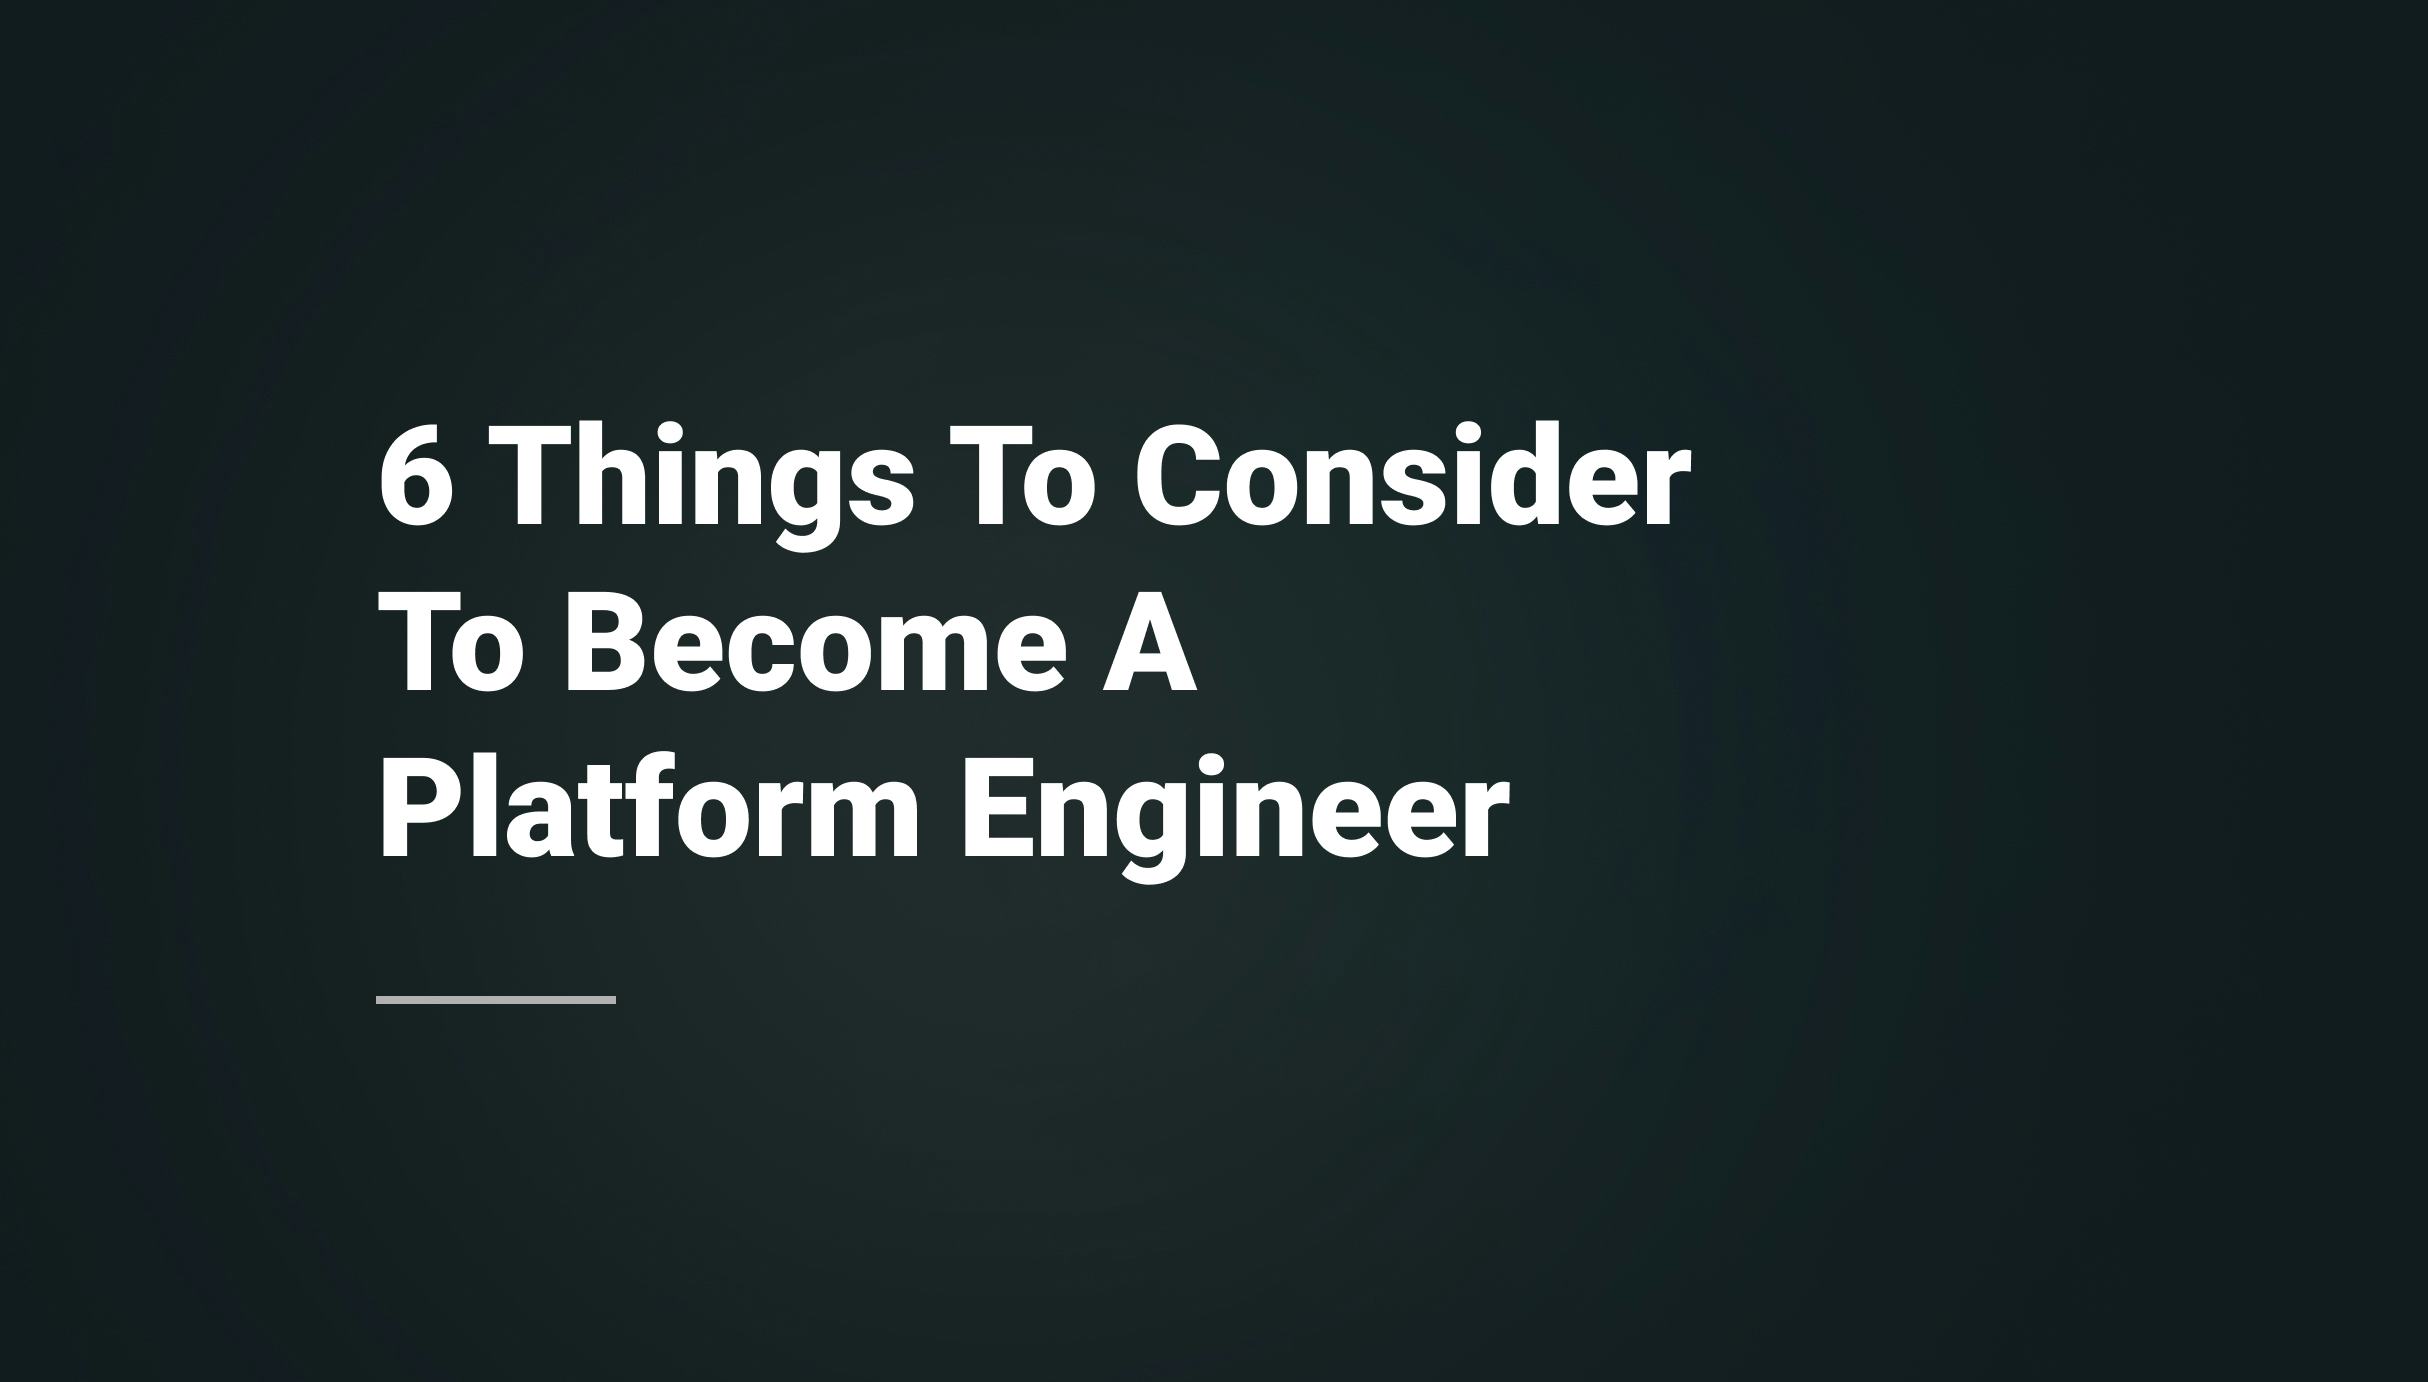 From DevOps to Platform Engineer: 6 Things You Should Consider